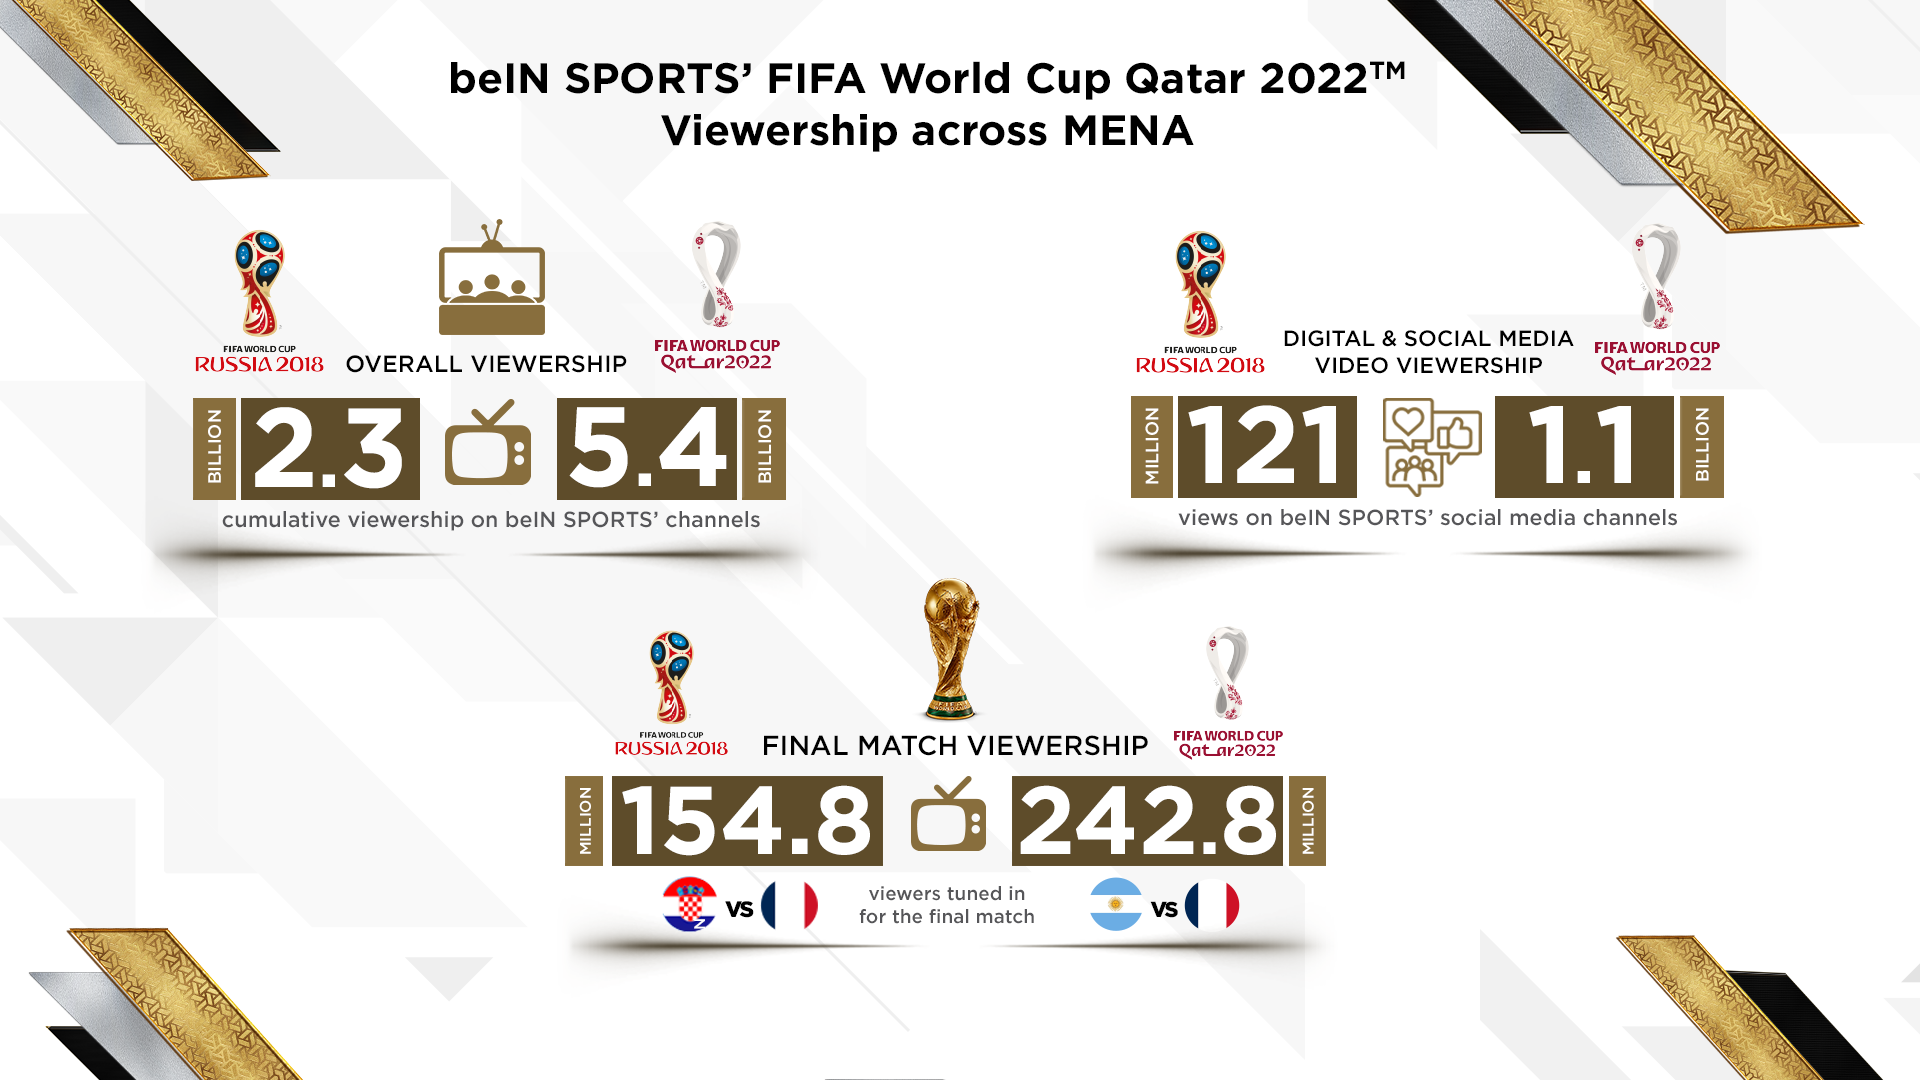 beIN SPORTS to Broadcast FIFA World Cup Qatar